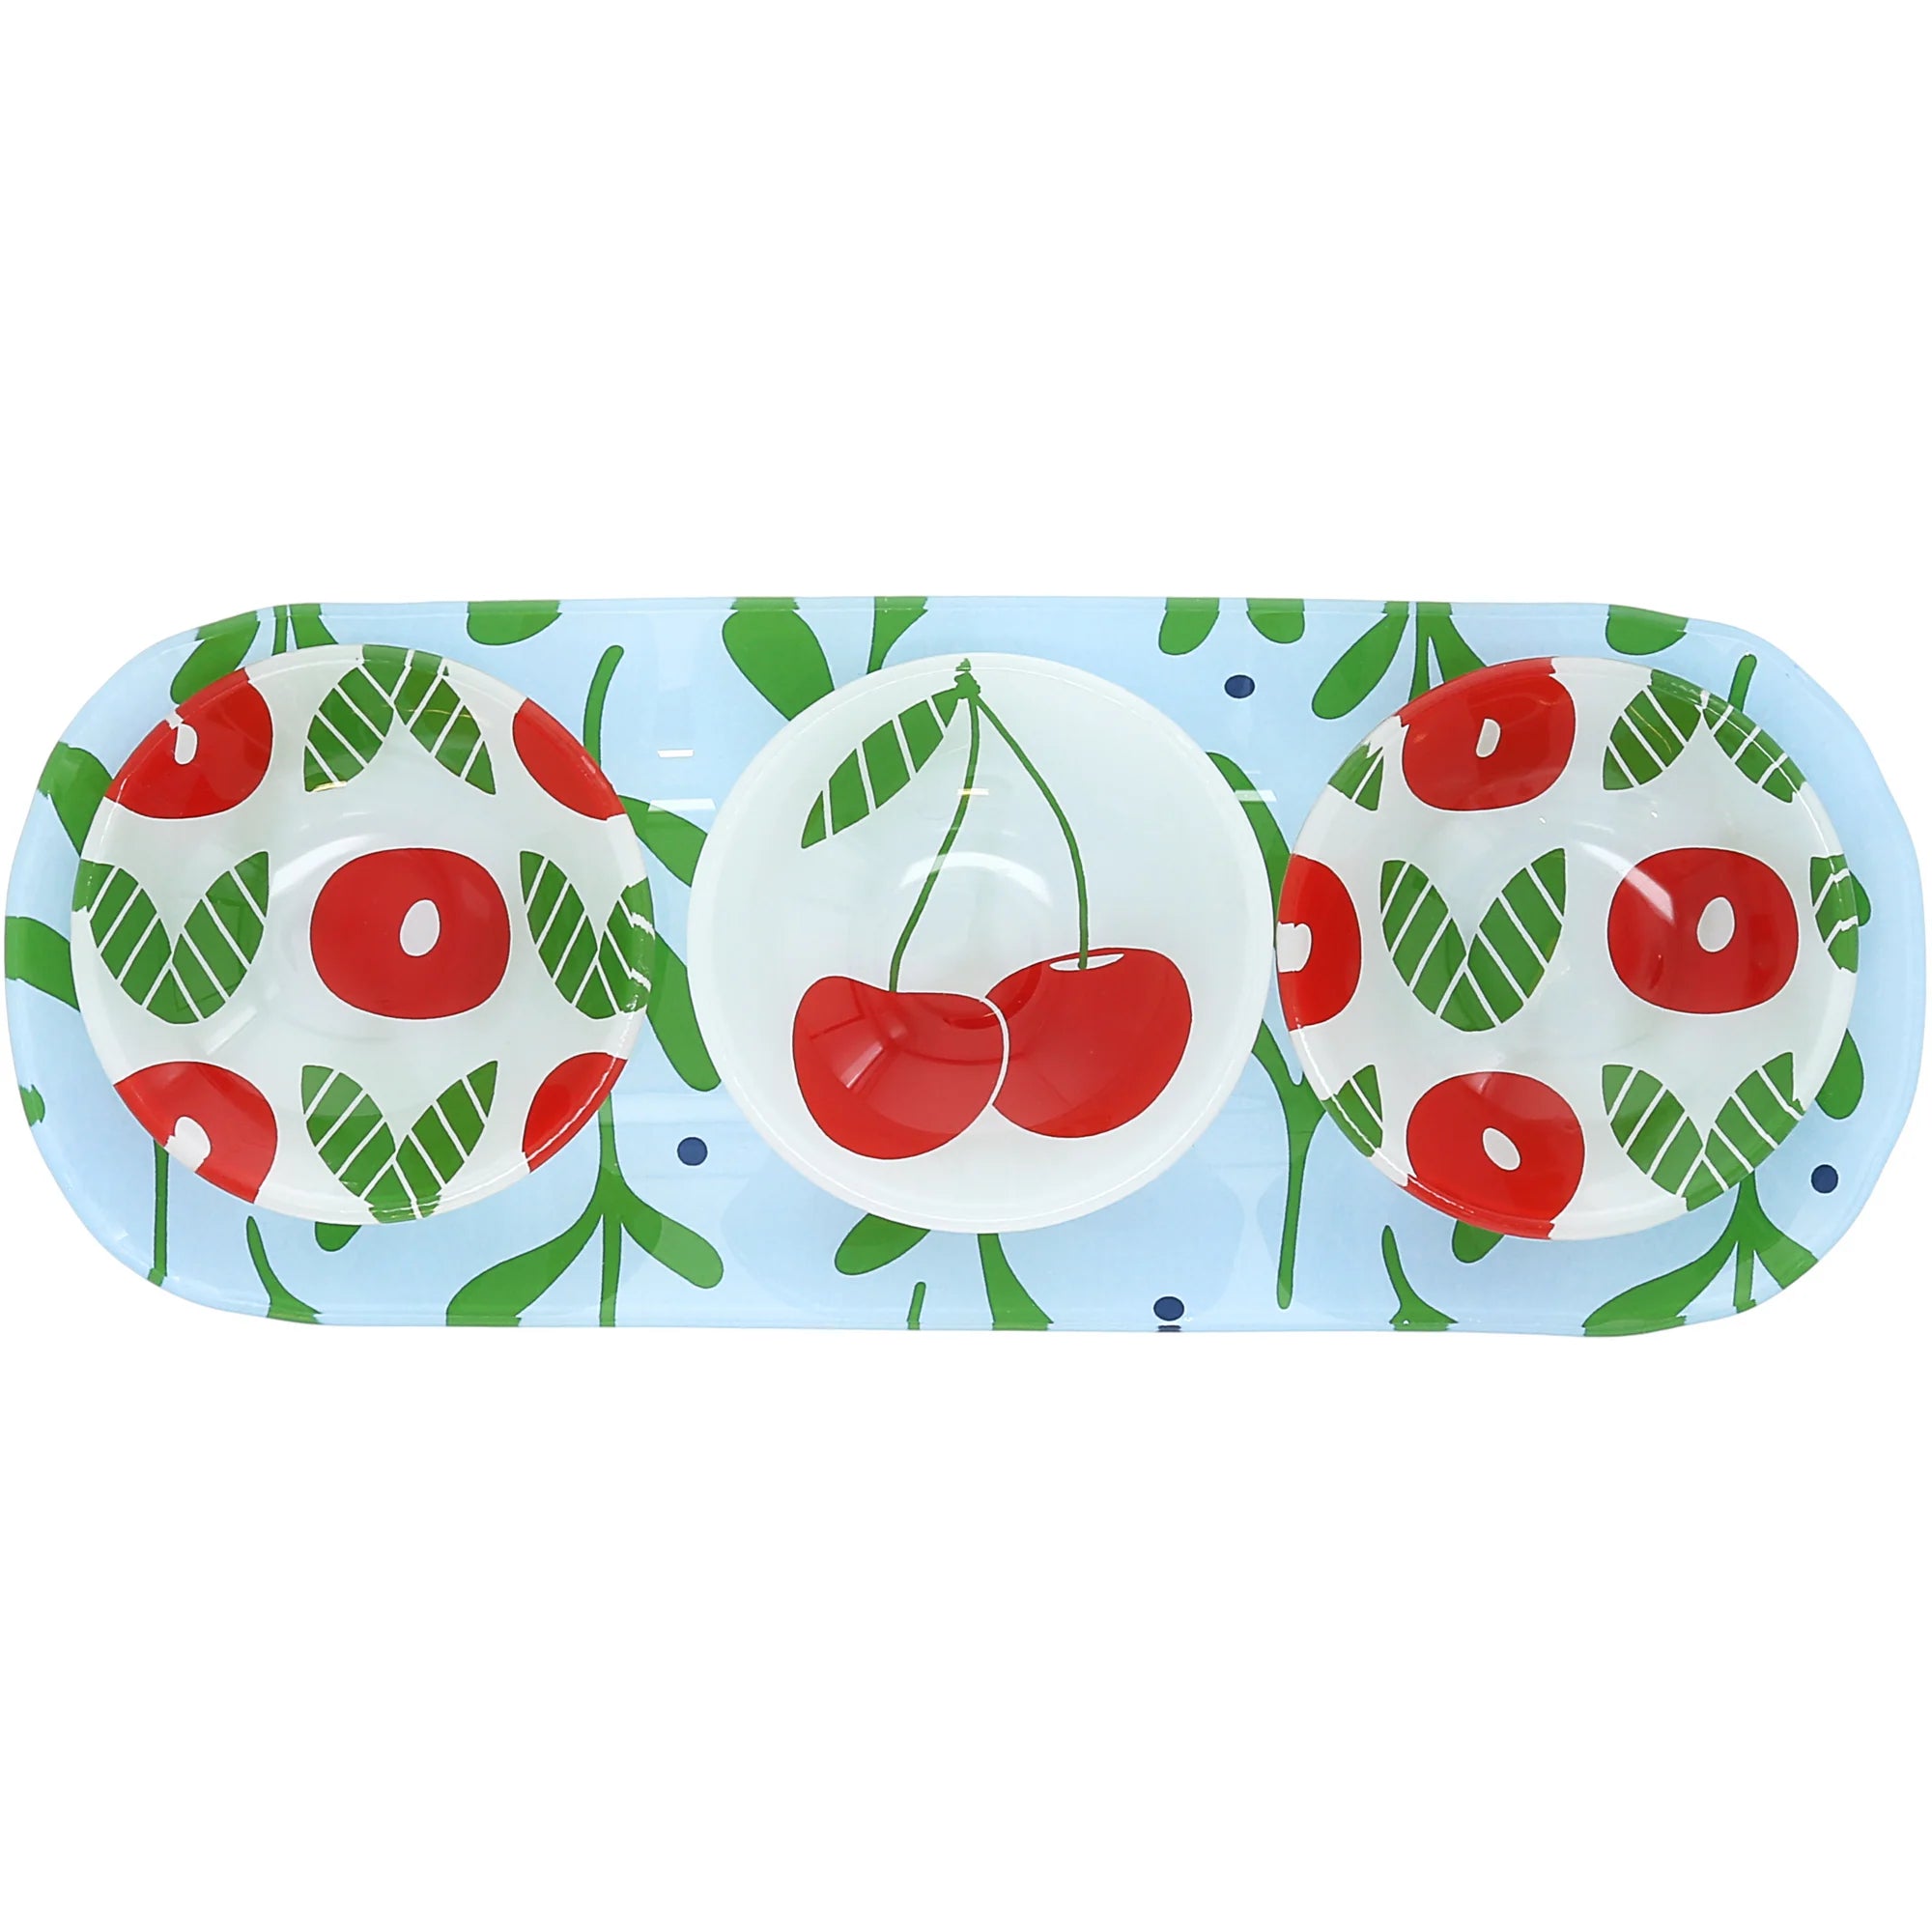 Fruit-Themed Serving Tray with Three Bowls